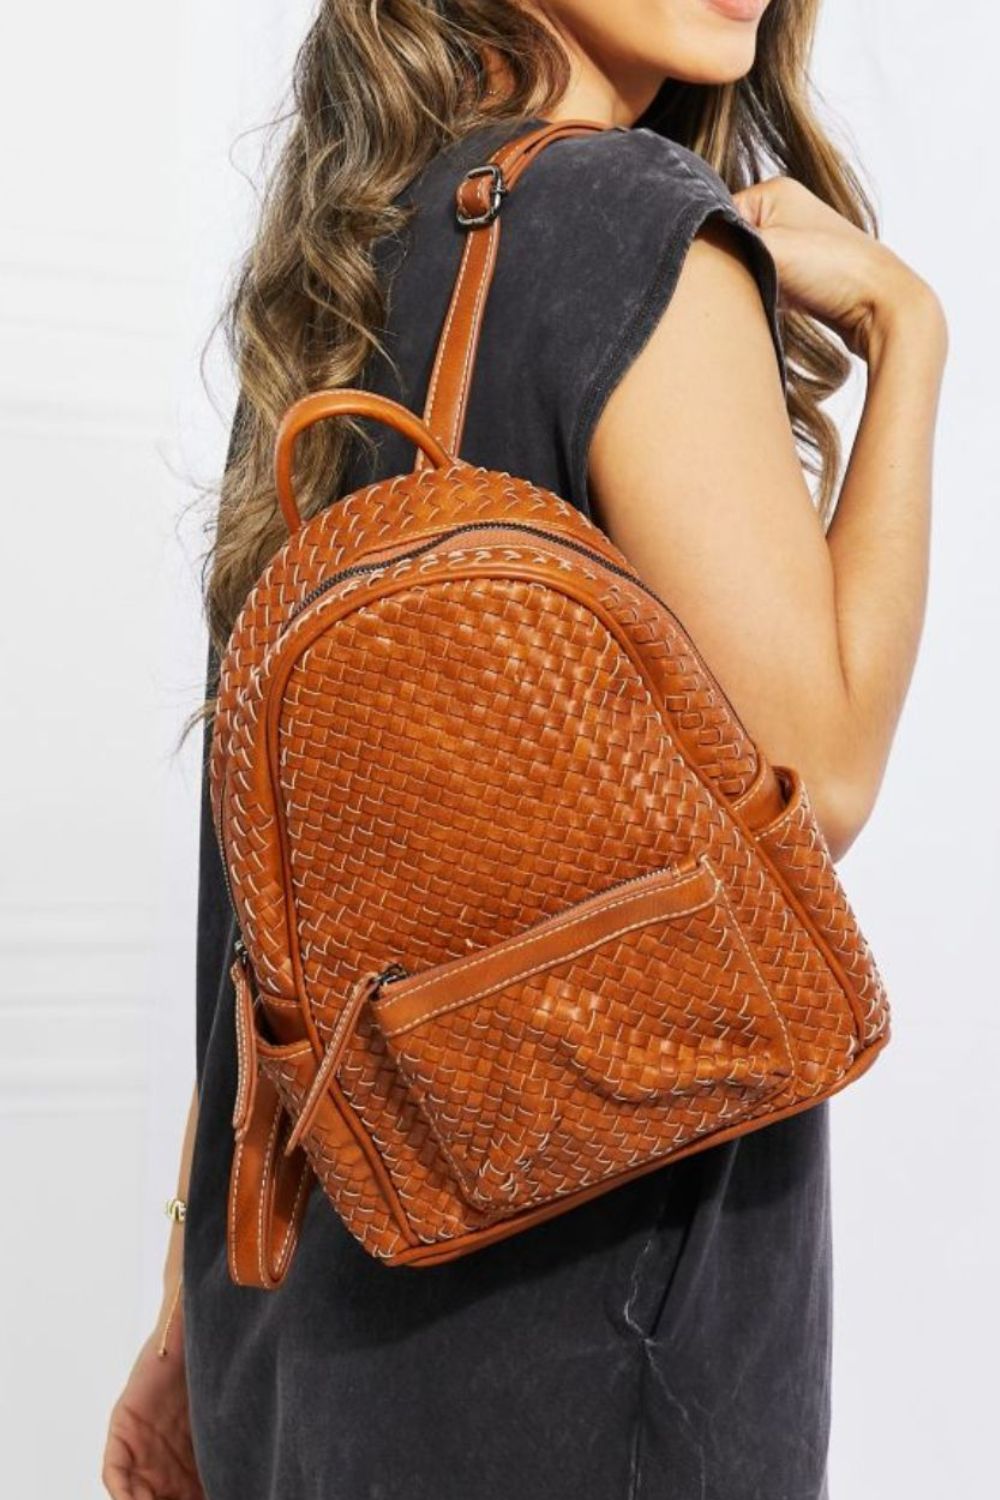 Certainly Chic Faux Leather Woven Backpack - Chestnut / One Size Girl Code